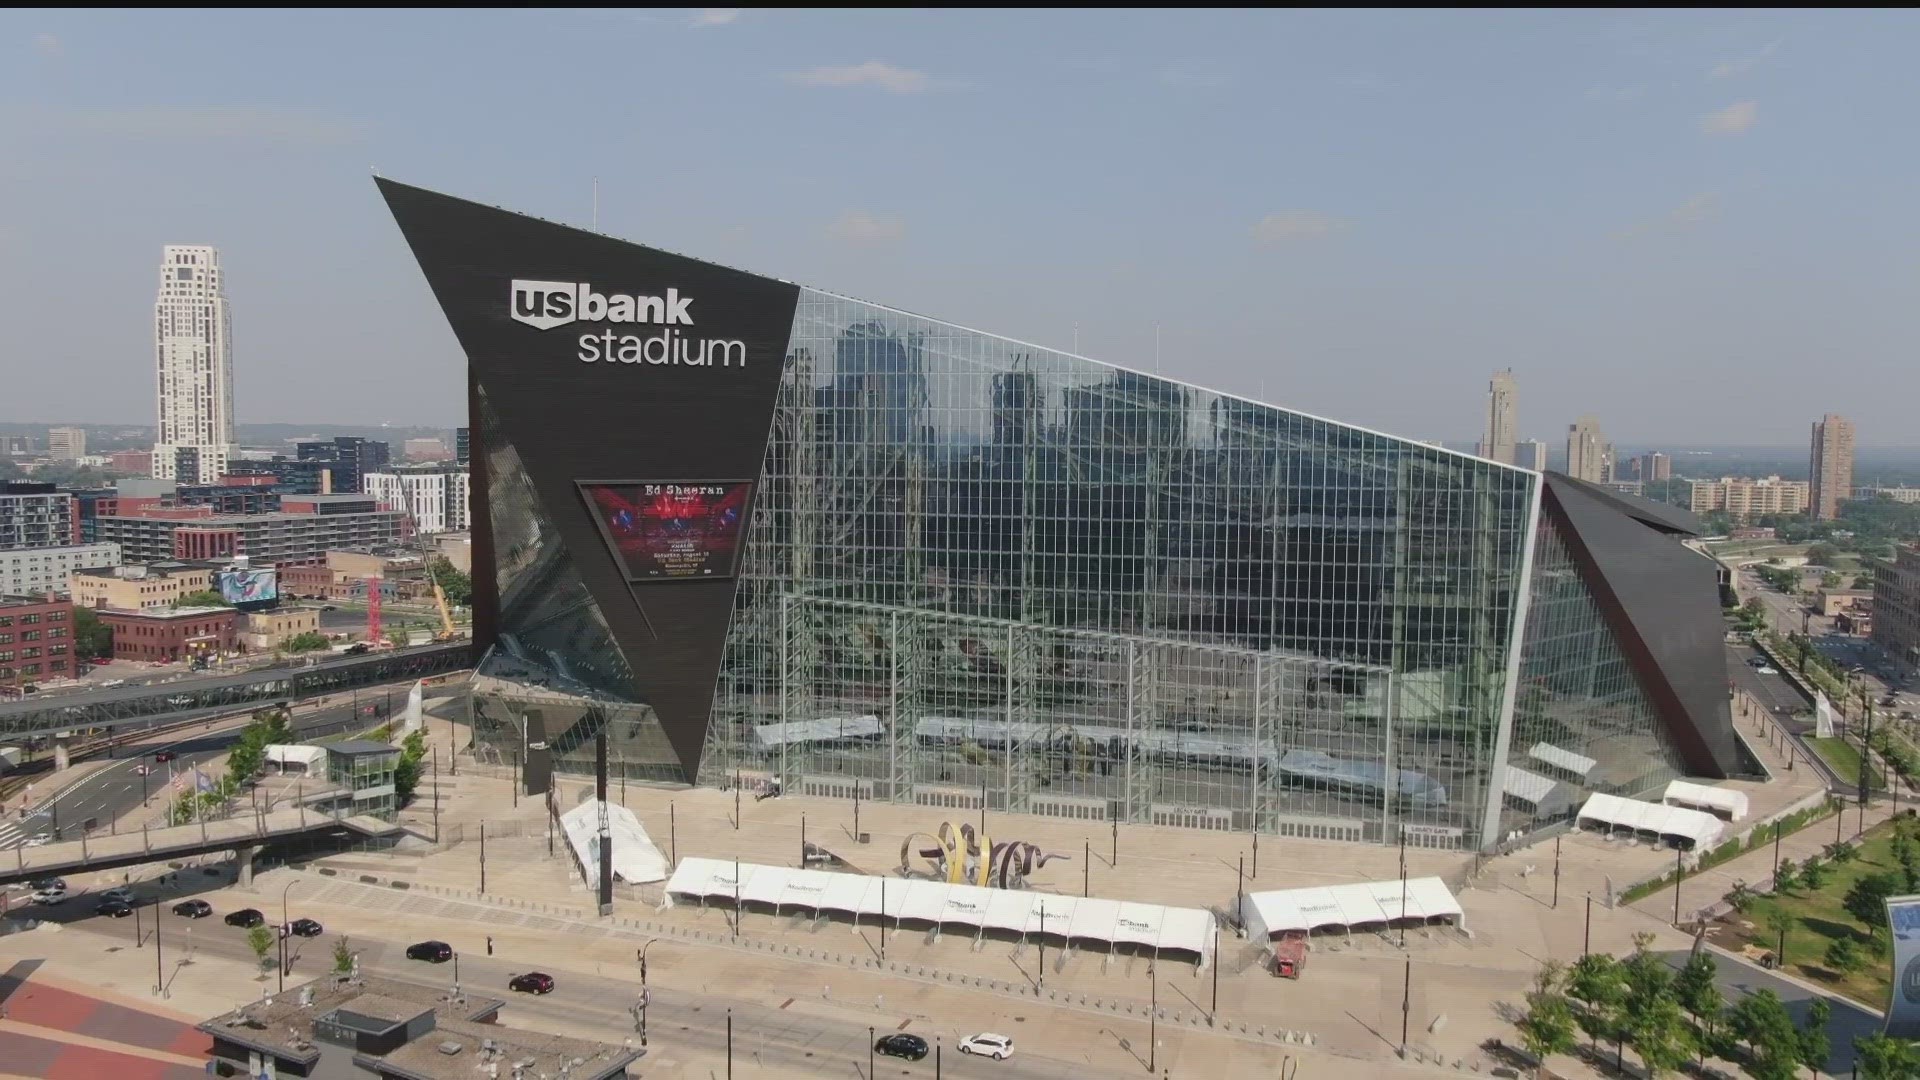 The state legislature approved a deal this session to pay off bond debt on U.S. Bank Stadium, which wasn't scheduled to happen until 2043.